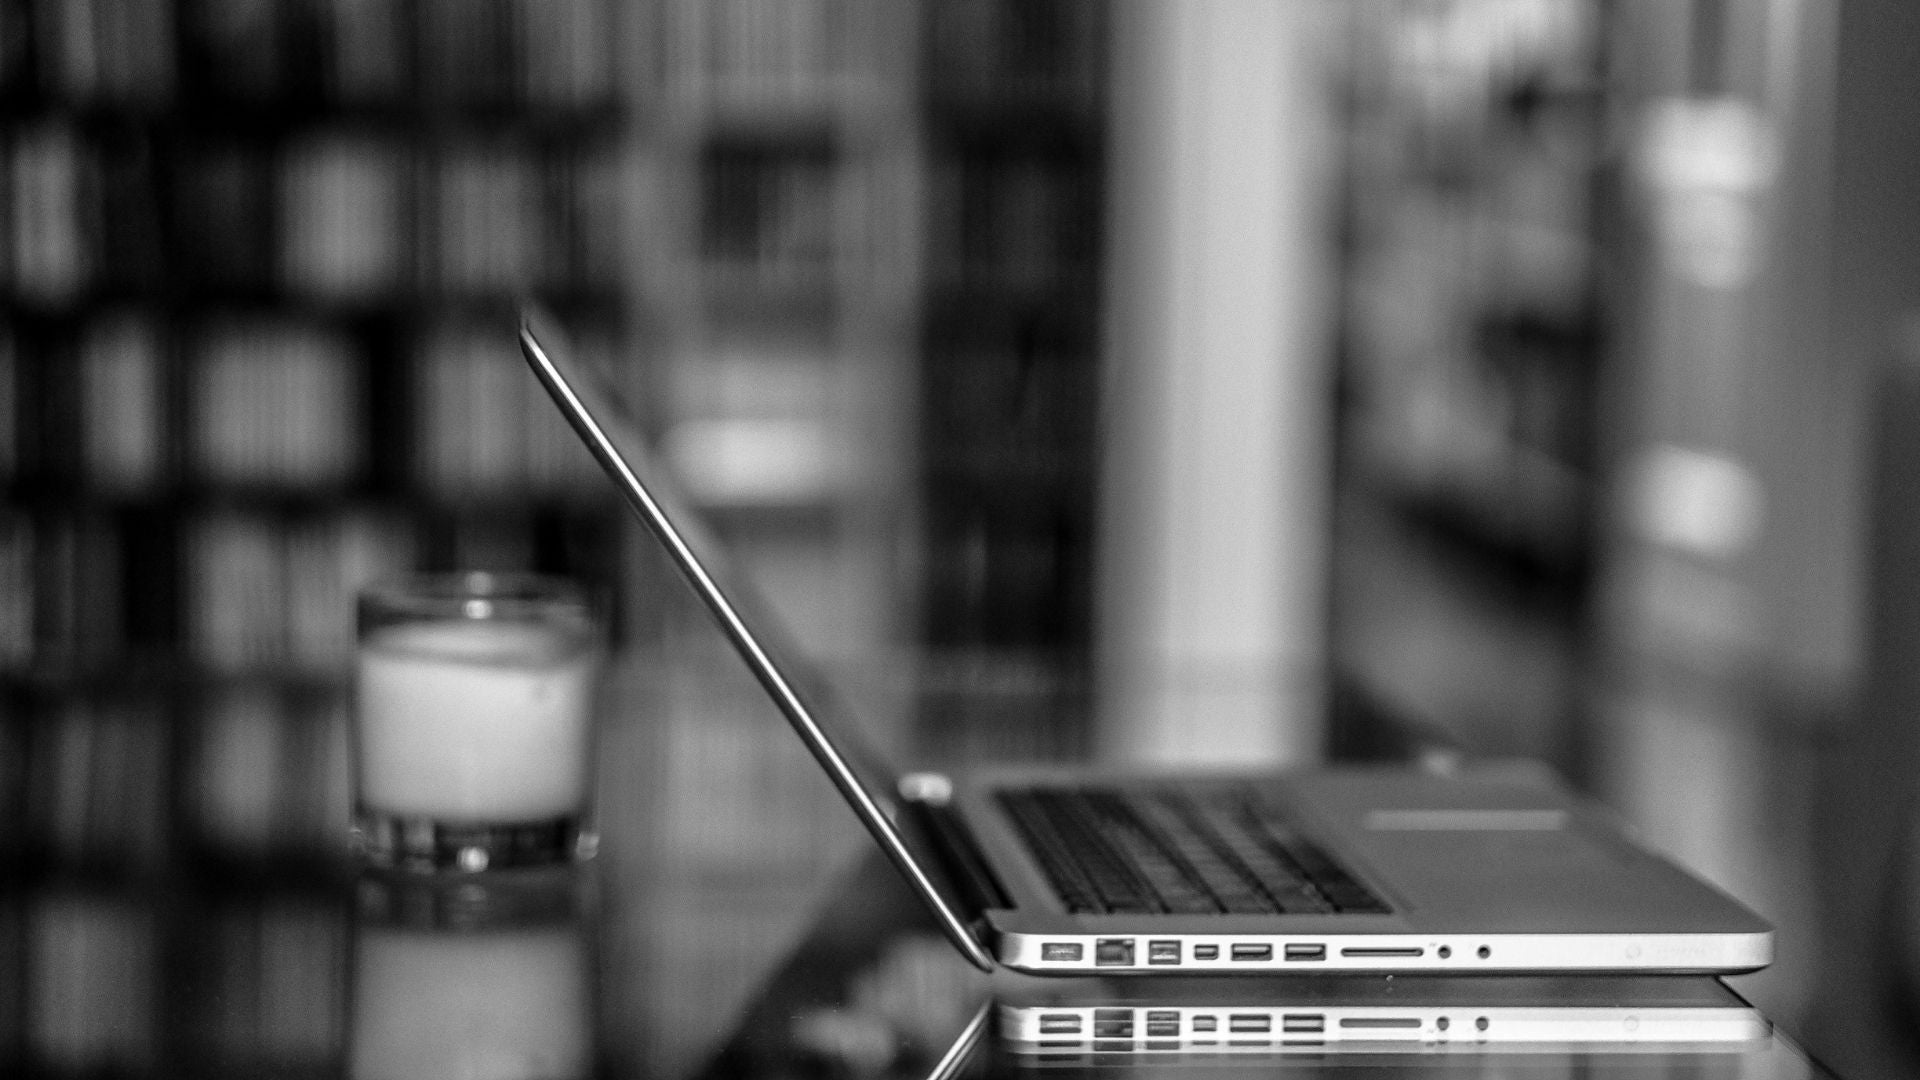 Black and white picture of a home office with a candle and laptop on the table